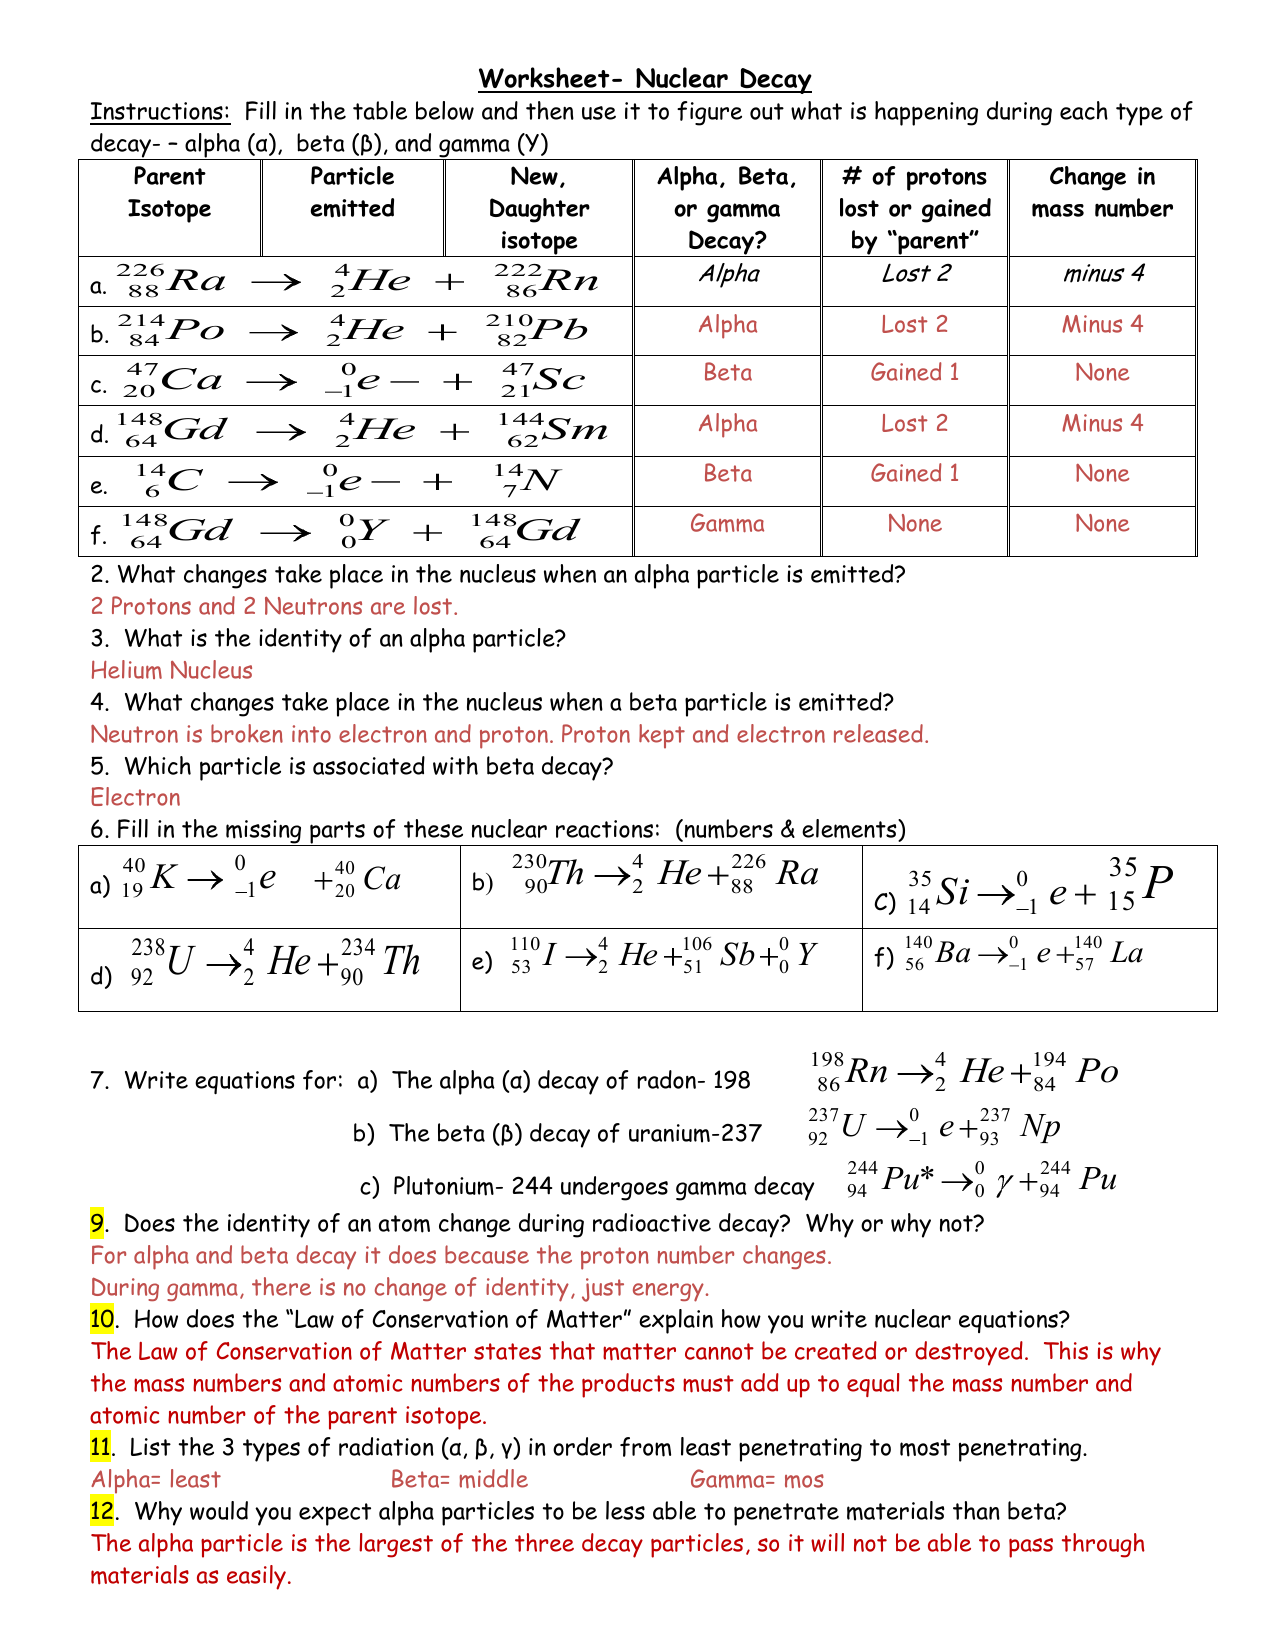 Worksheet- Nuclear Decay In Nuclear Decay Worksheet Answers Key